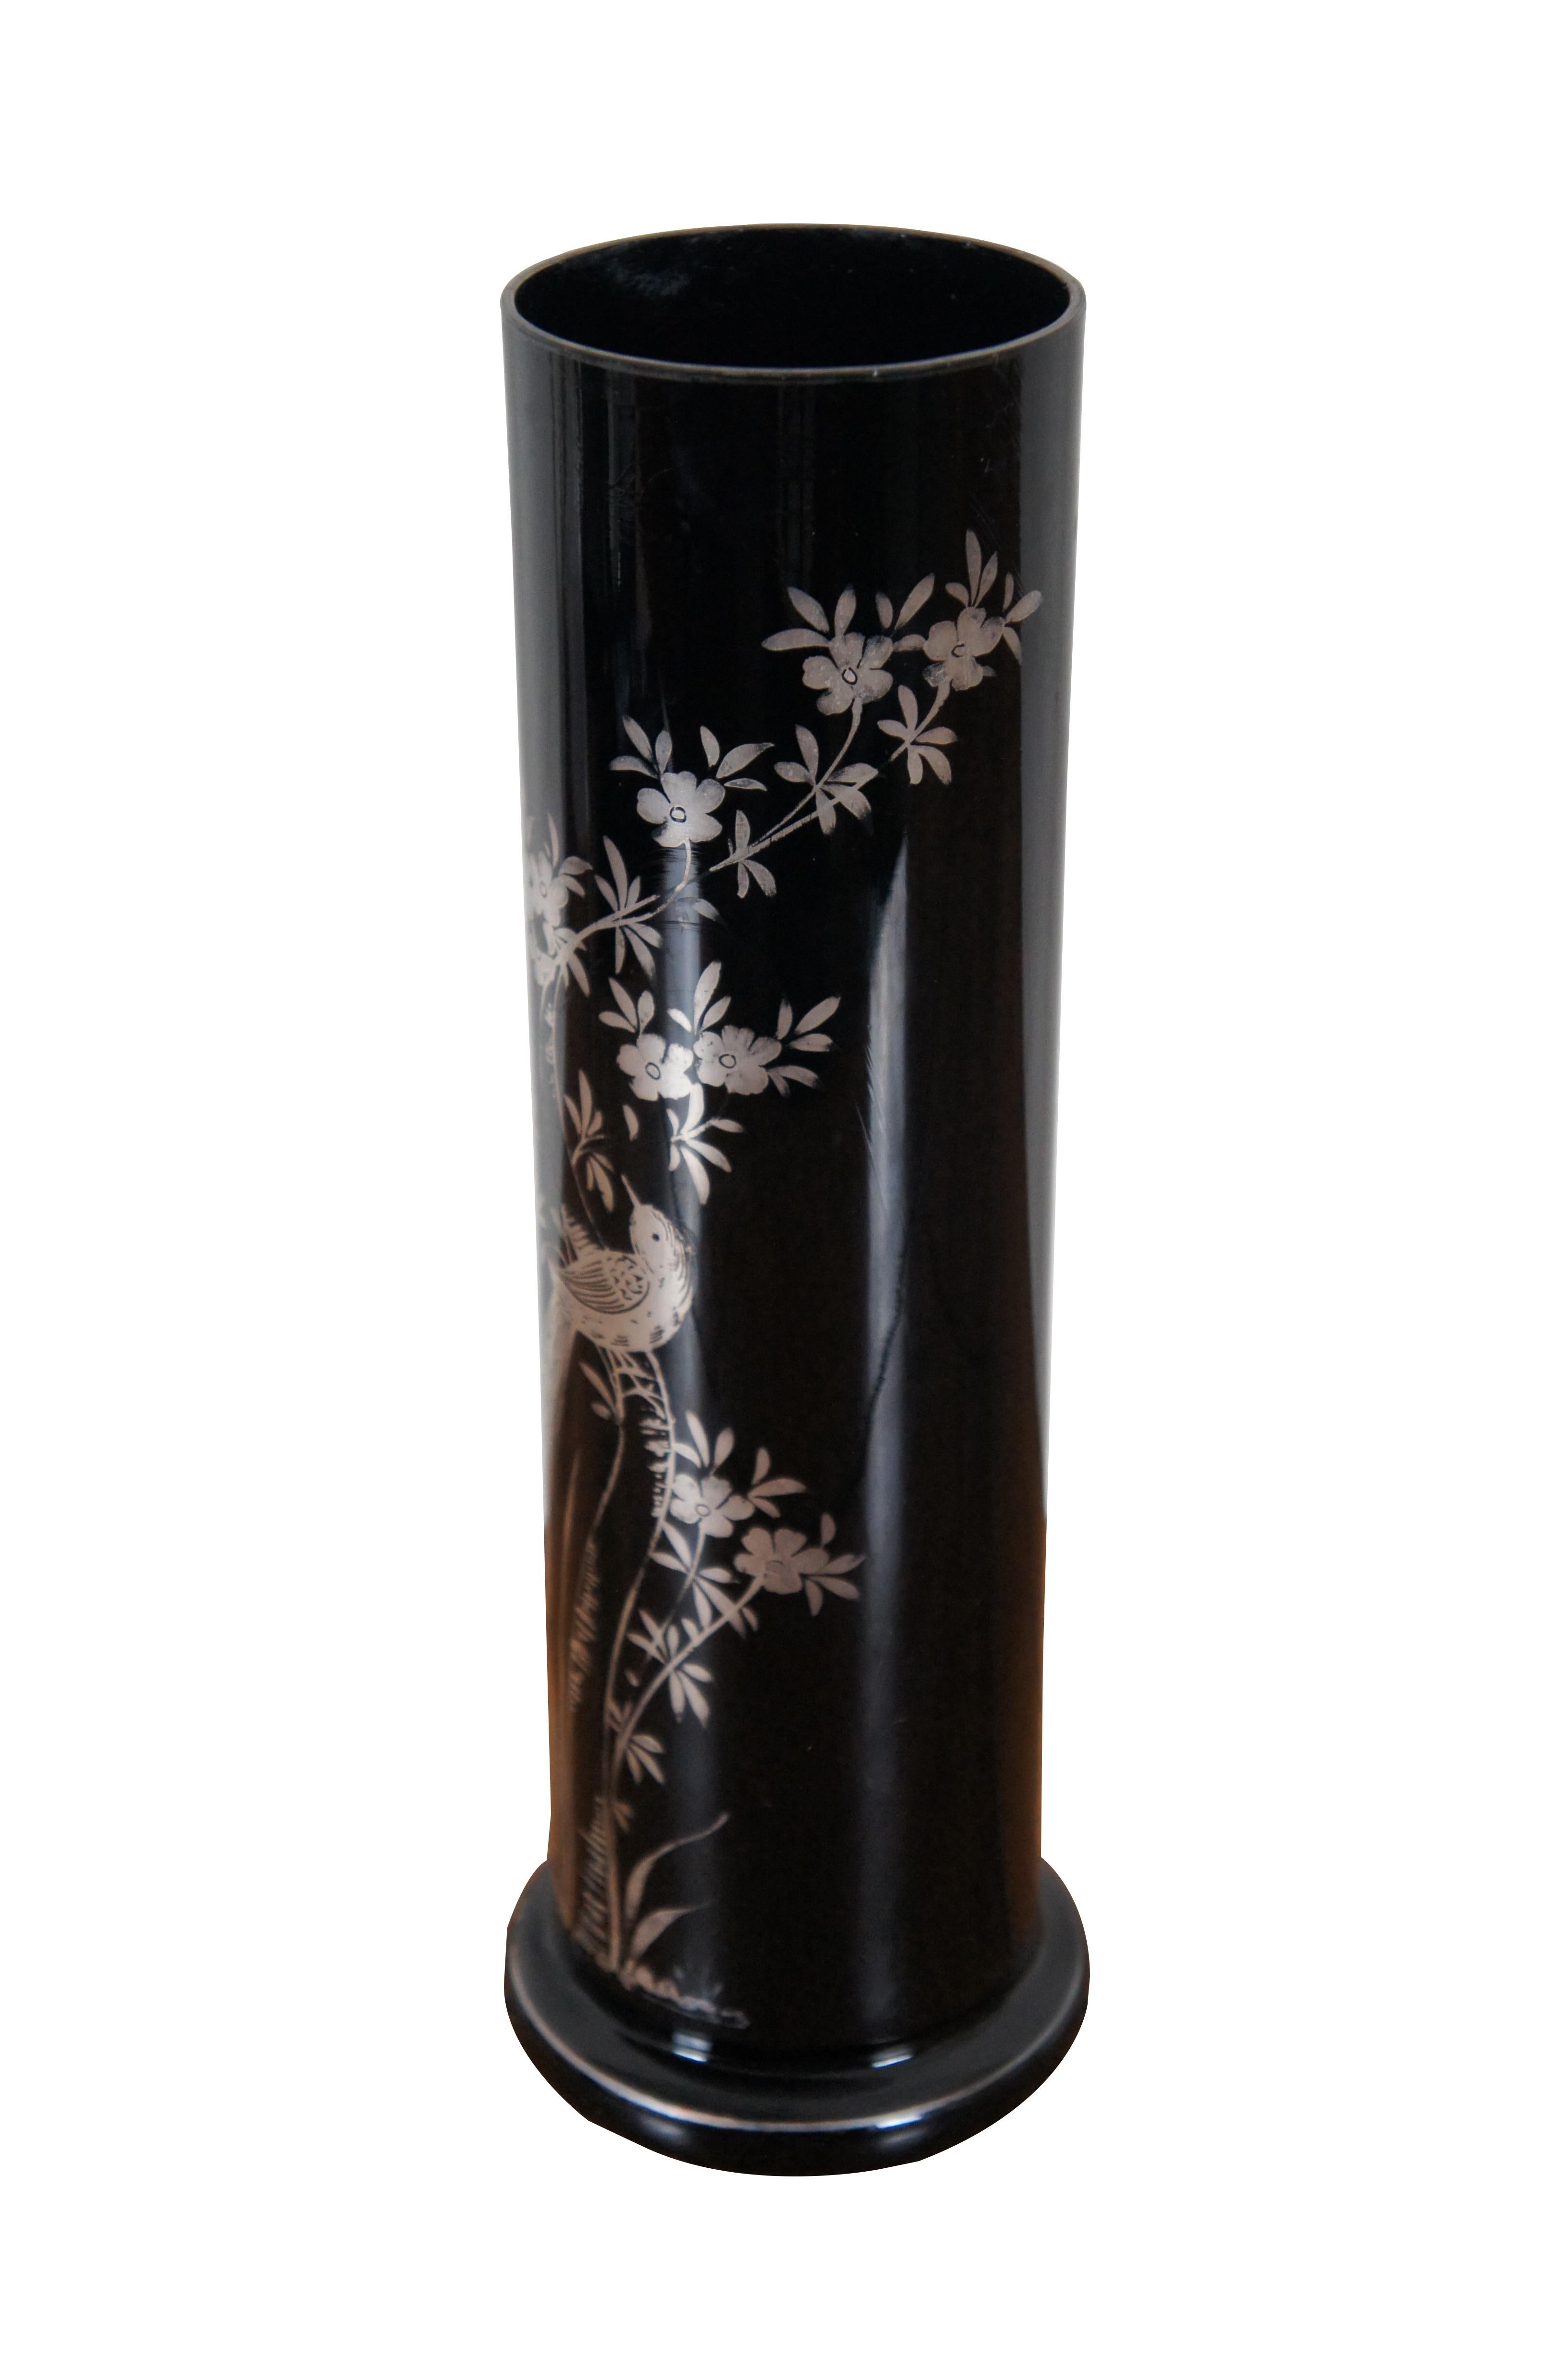 Antique Czech / Bohemian black glass cylindar bud vase featuring silver overlay scene with bird and flowers.

Dimensions:
3.75